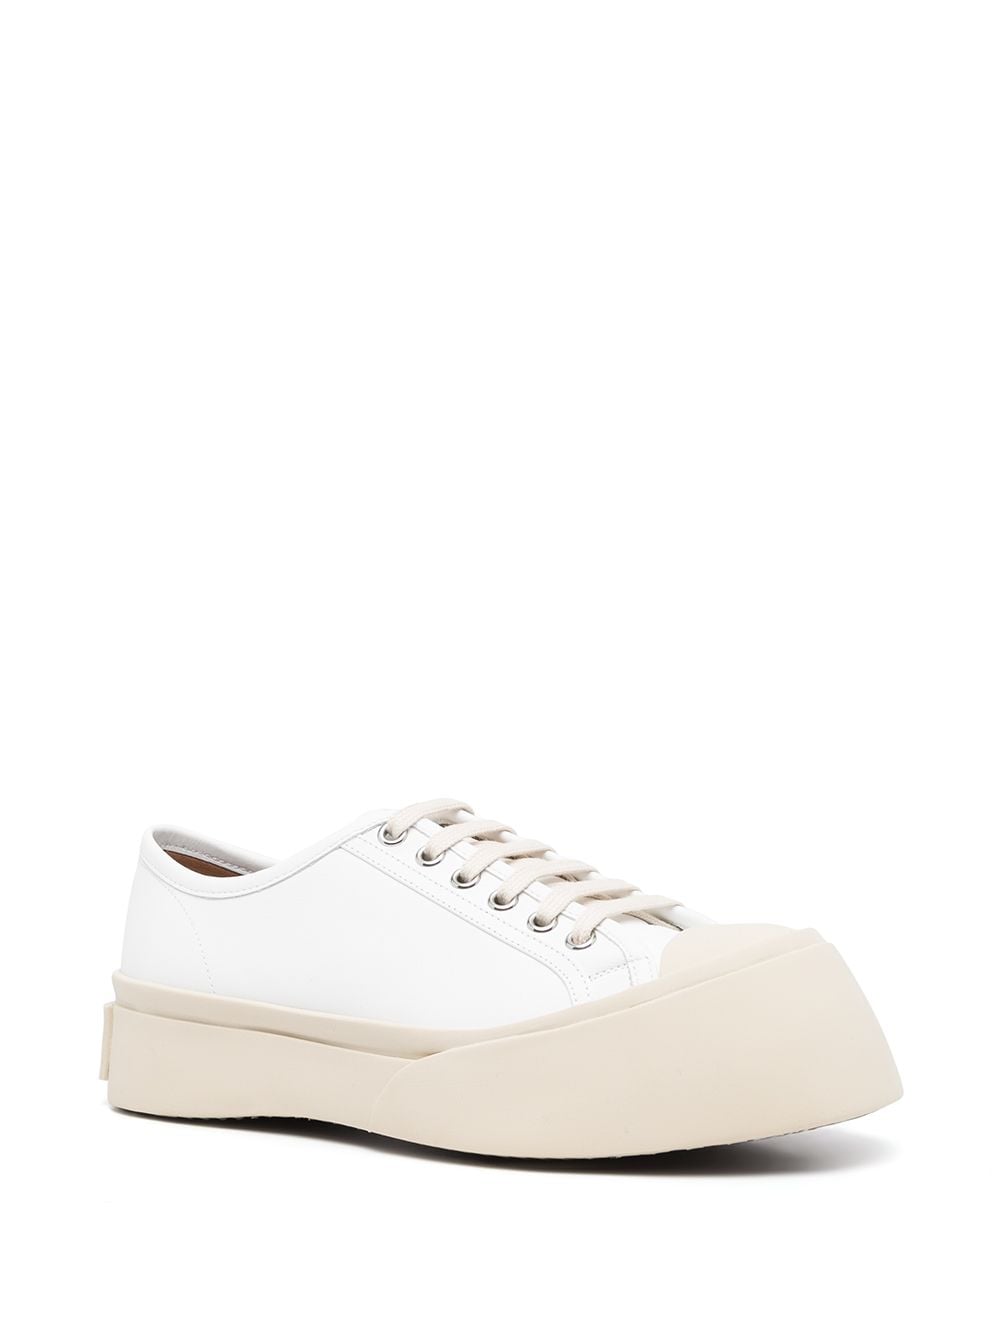 Image 2 of Marni Pablo low-top sneakers